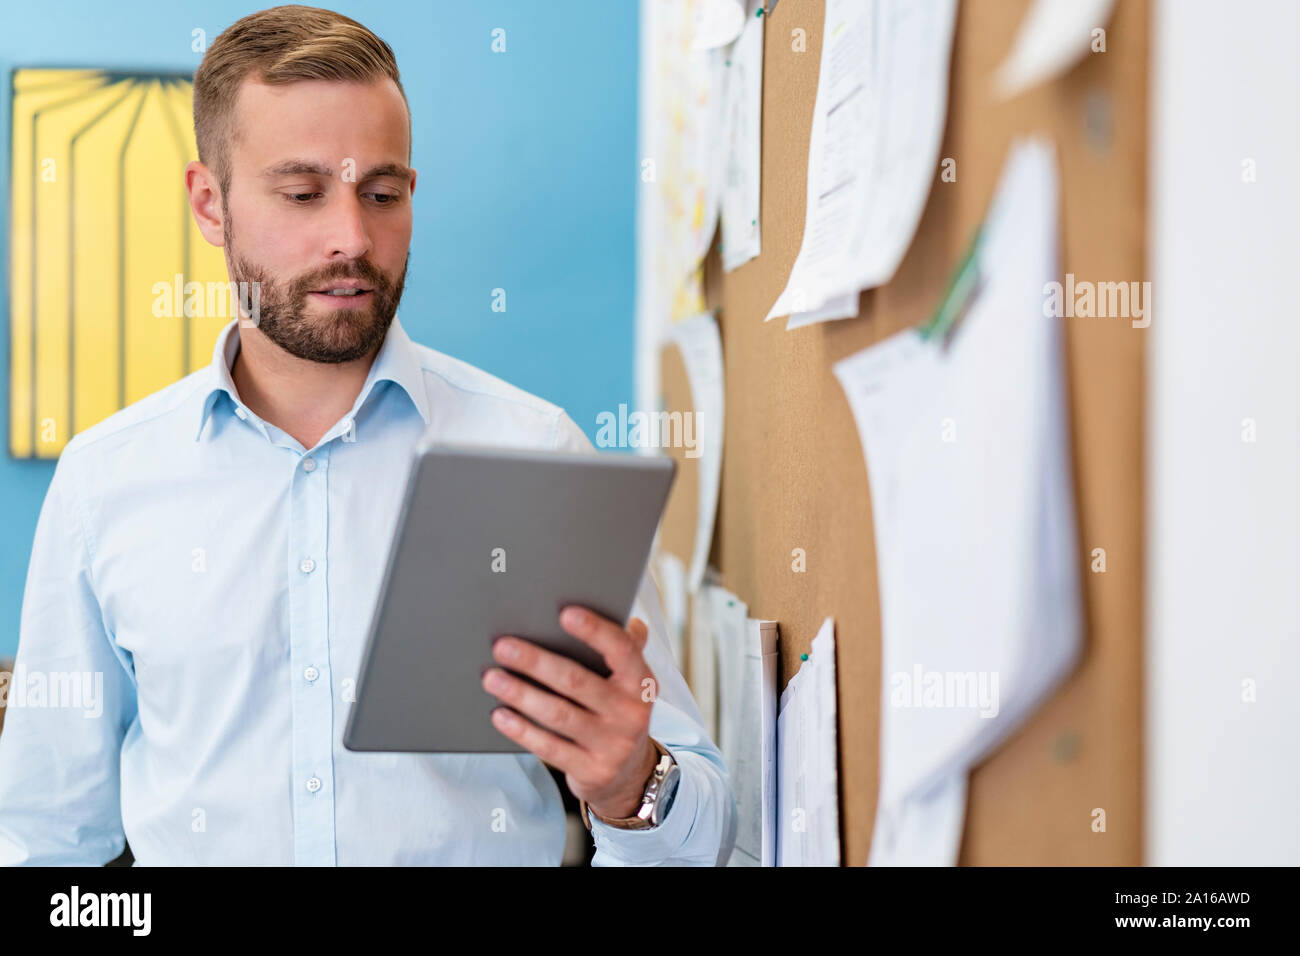 Businessman using tablet at pinboard in office Stock Photo